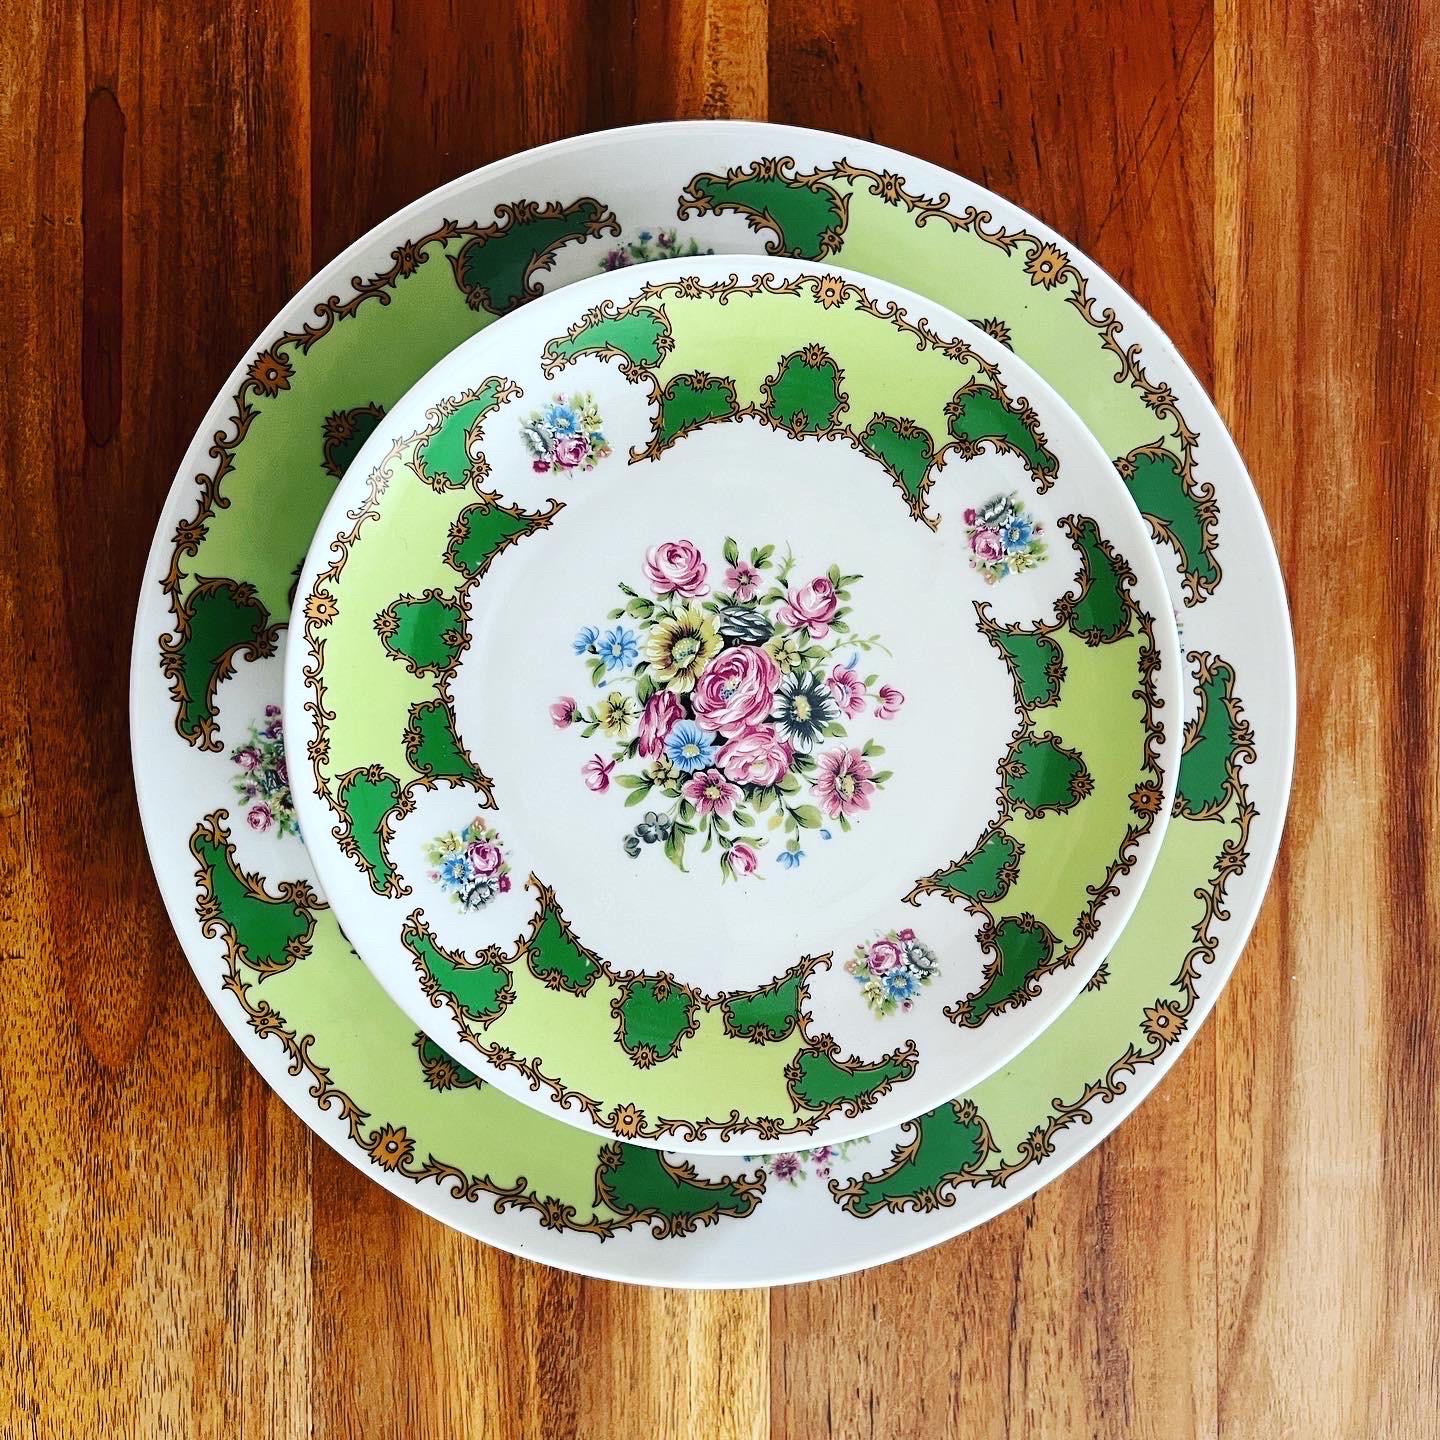 Coordinated Dessert Green Decorated Porcelain '900 -Antiques' For Sale 3